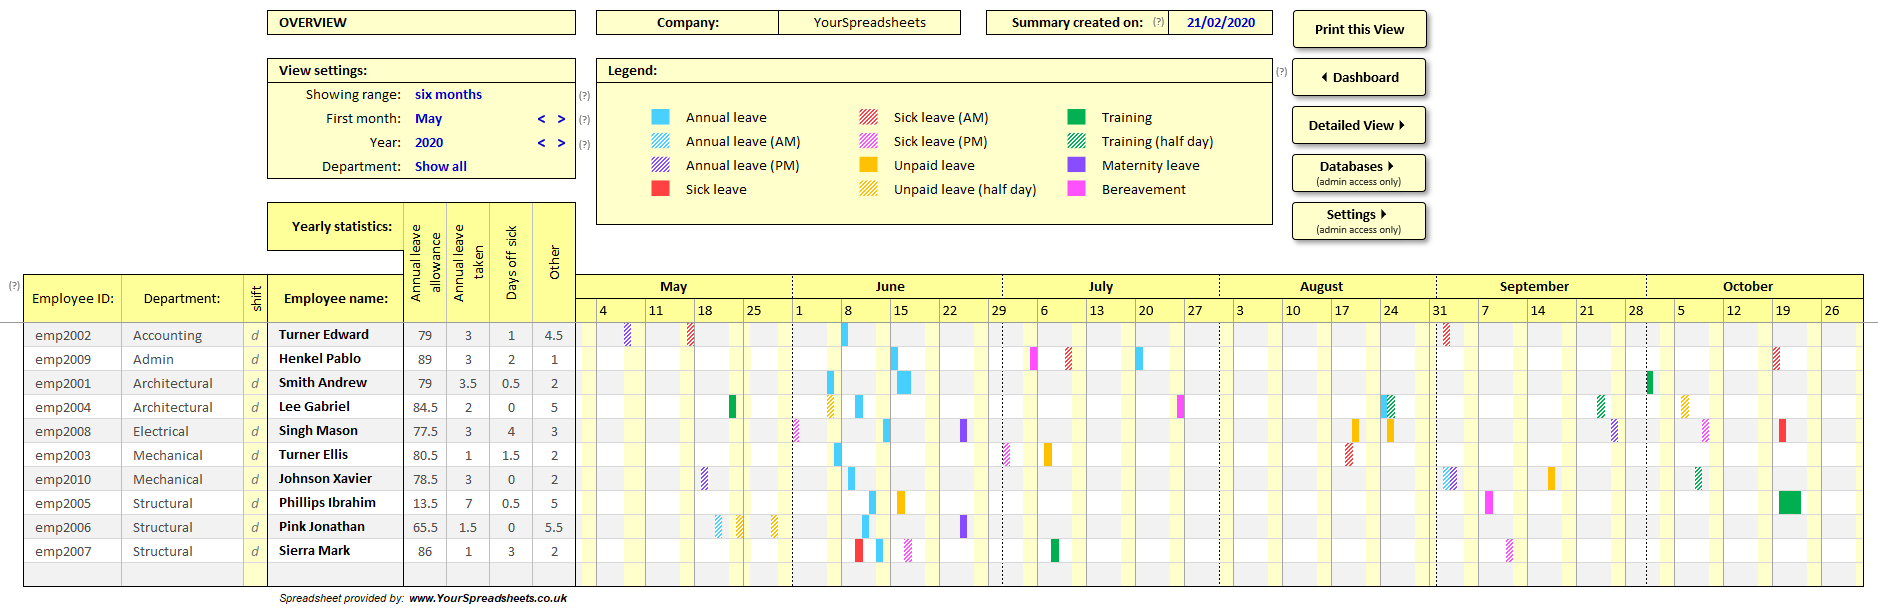 Employee Tracking Template from www.yourspreadsheets.co.uk